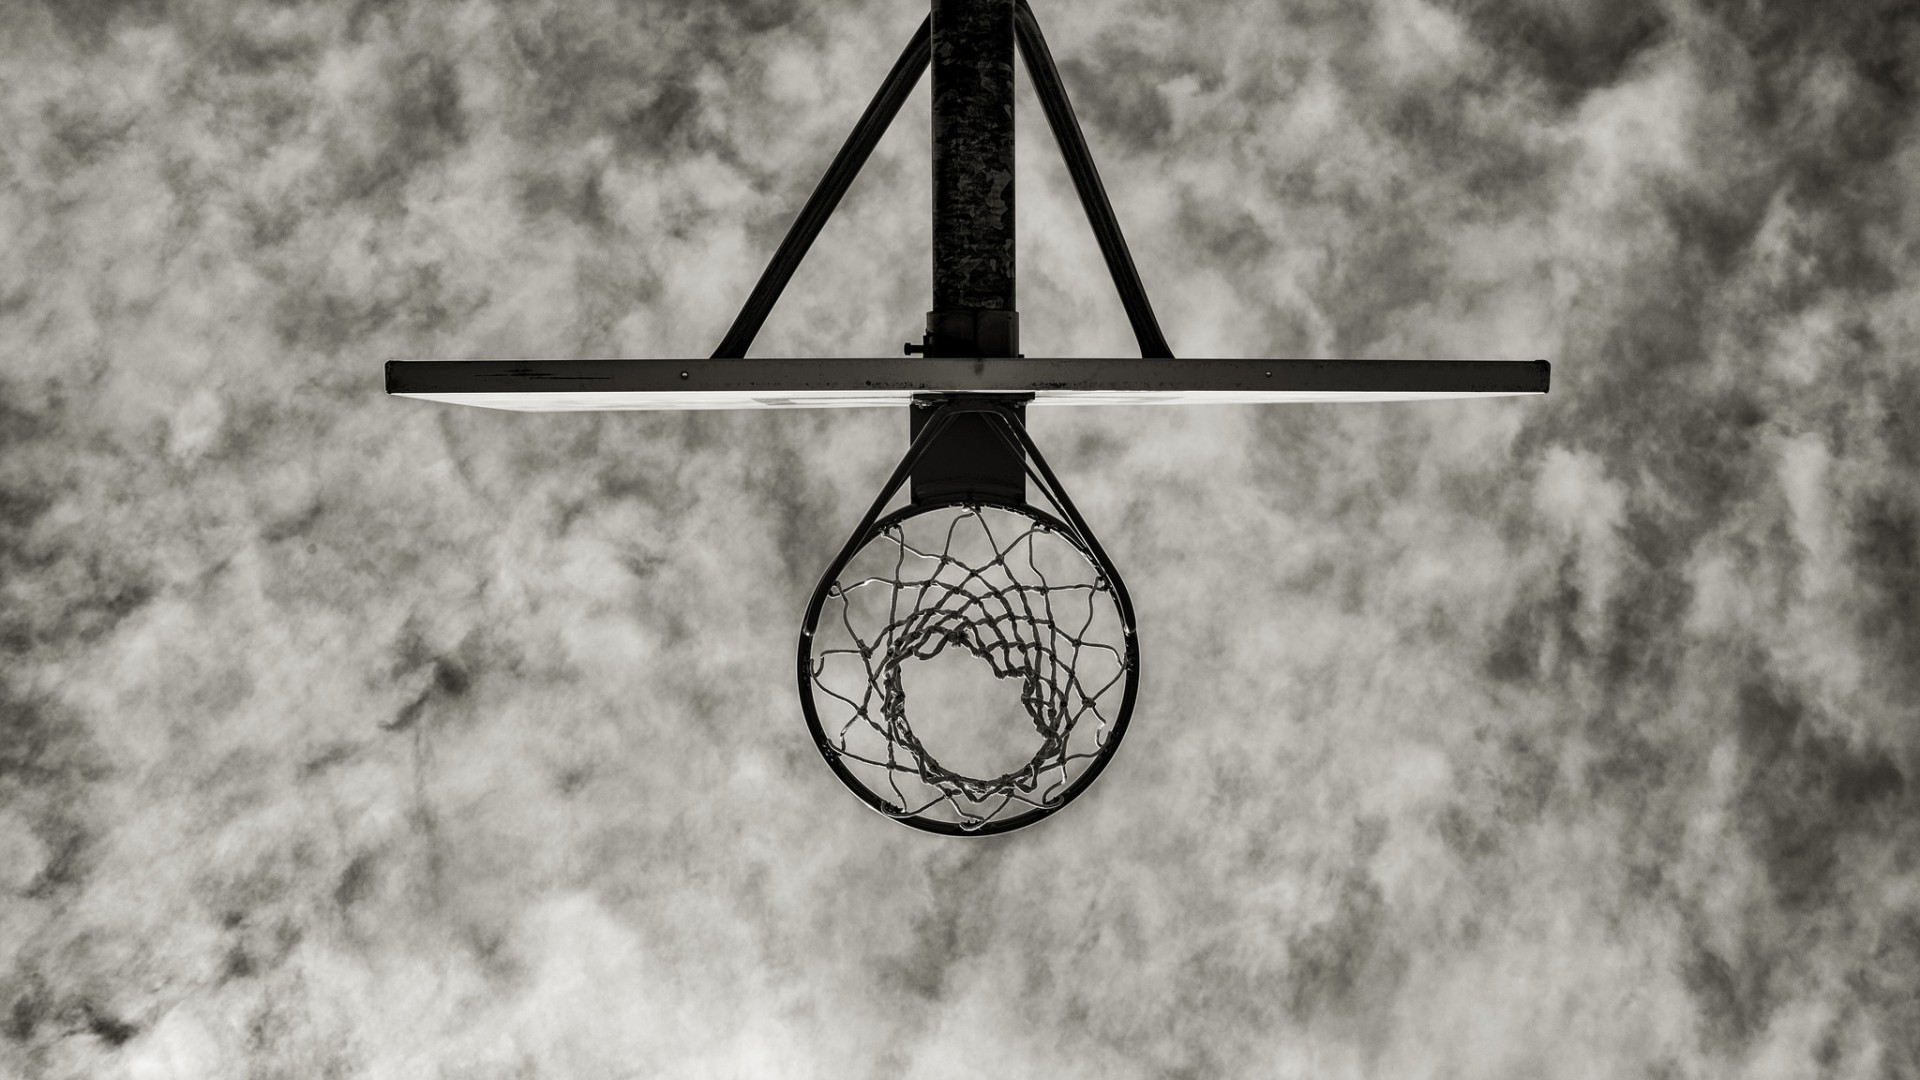 Worms Eye View Basketball Nets Clouds Sky Monochrome Hoop Symmetry Simple Bottom View 1920x1080